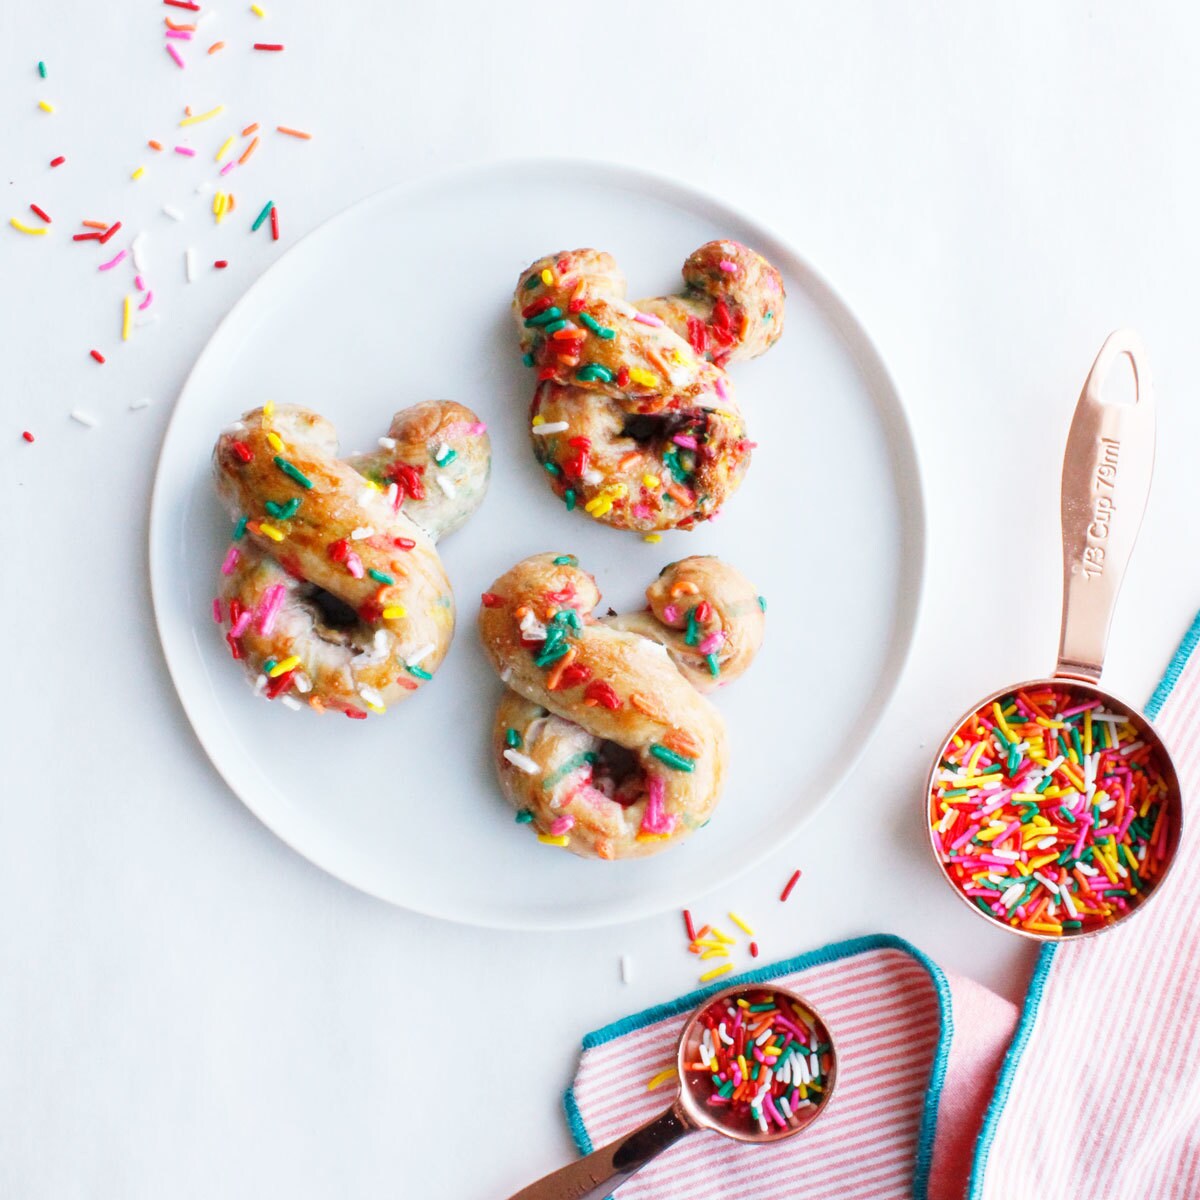 Mickey Mouse shaped pretzels decorated with sprinkles.